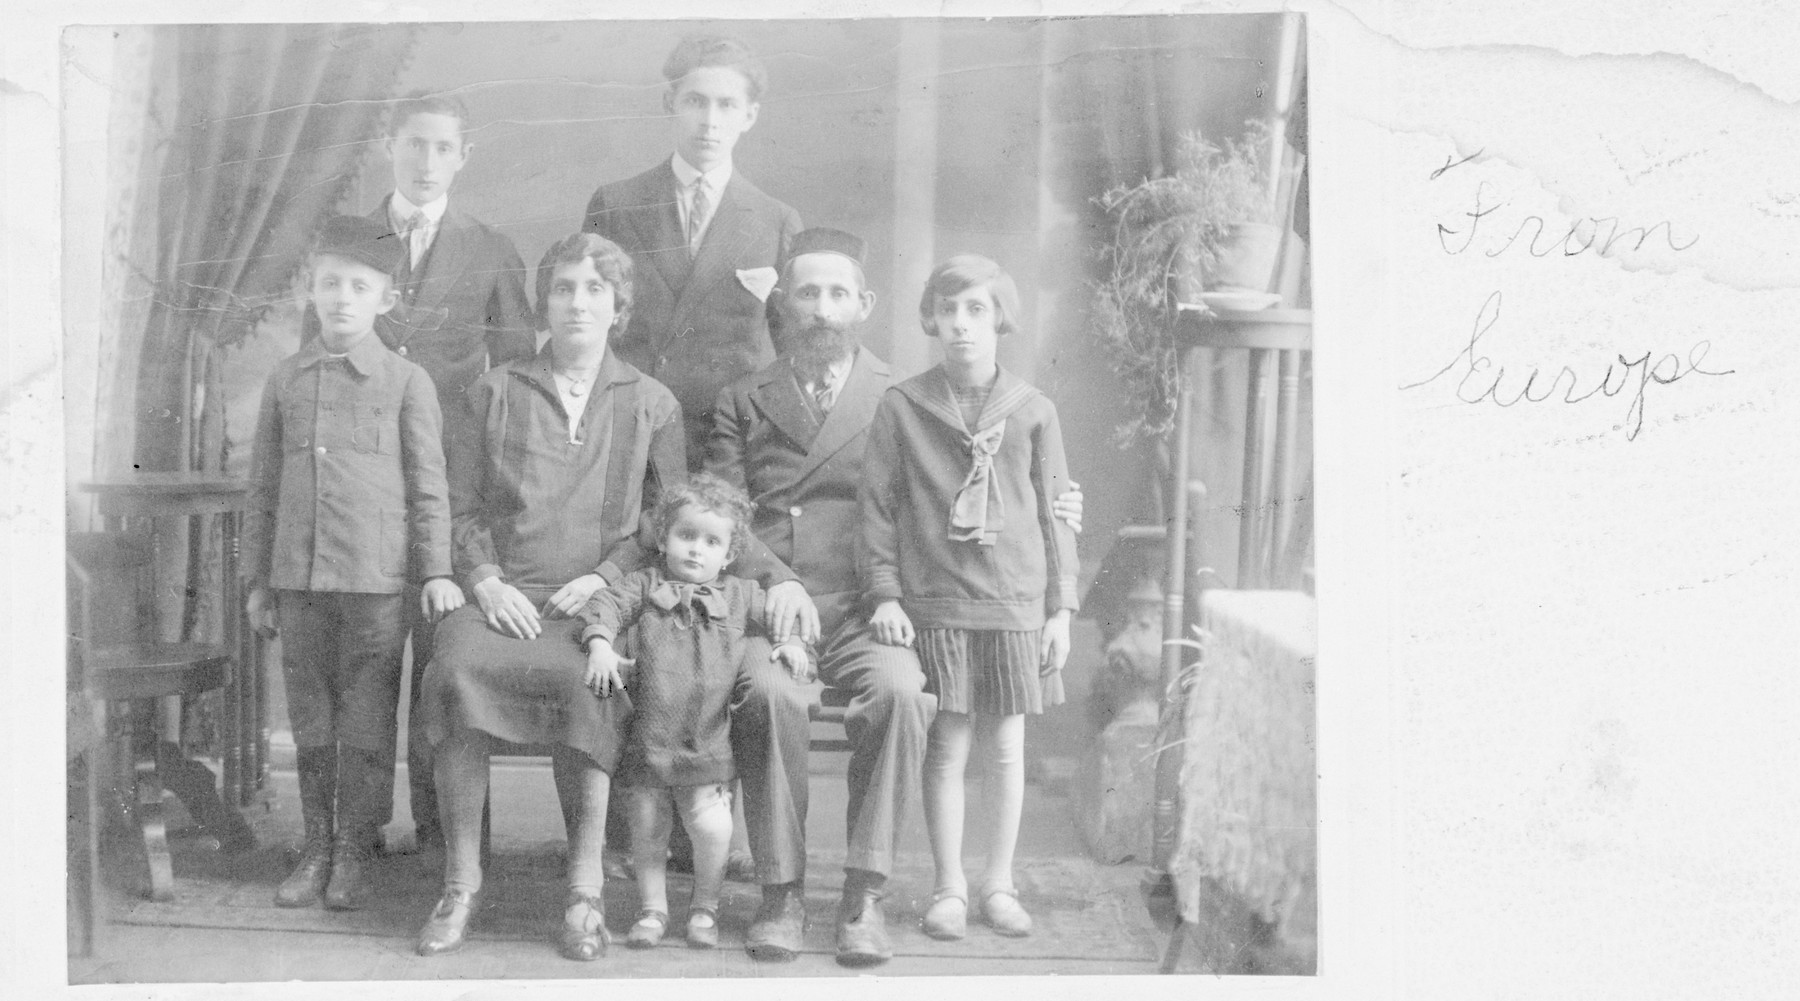 Studio portrait of Fraidl and Yehoshua Weinstein and their five children in prewar Poland.

Moshe Herschel is standing at the lower left.  The young child, Raizl, stands next to Yehoshua (Osias) Weinstein, and Miriam stands at the far right.  At the top right, stands Joseph, the oldest son.  None of the family members survived.